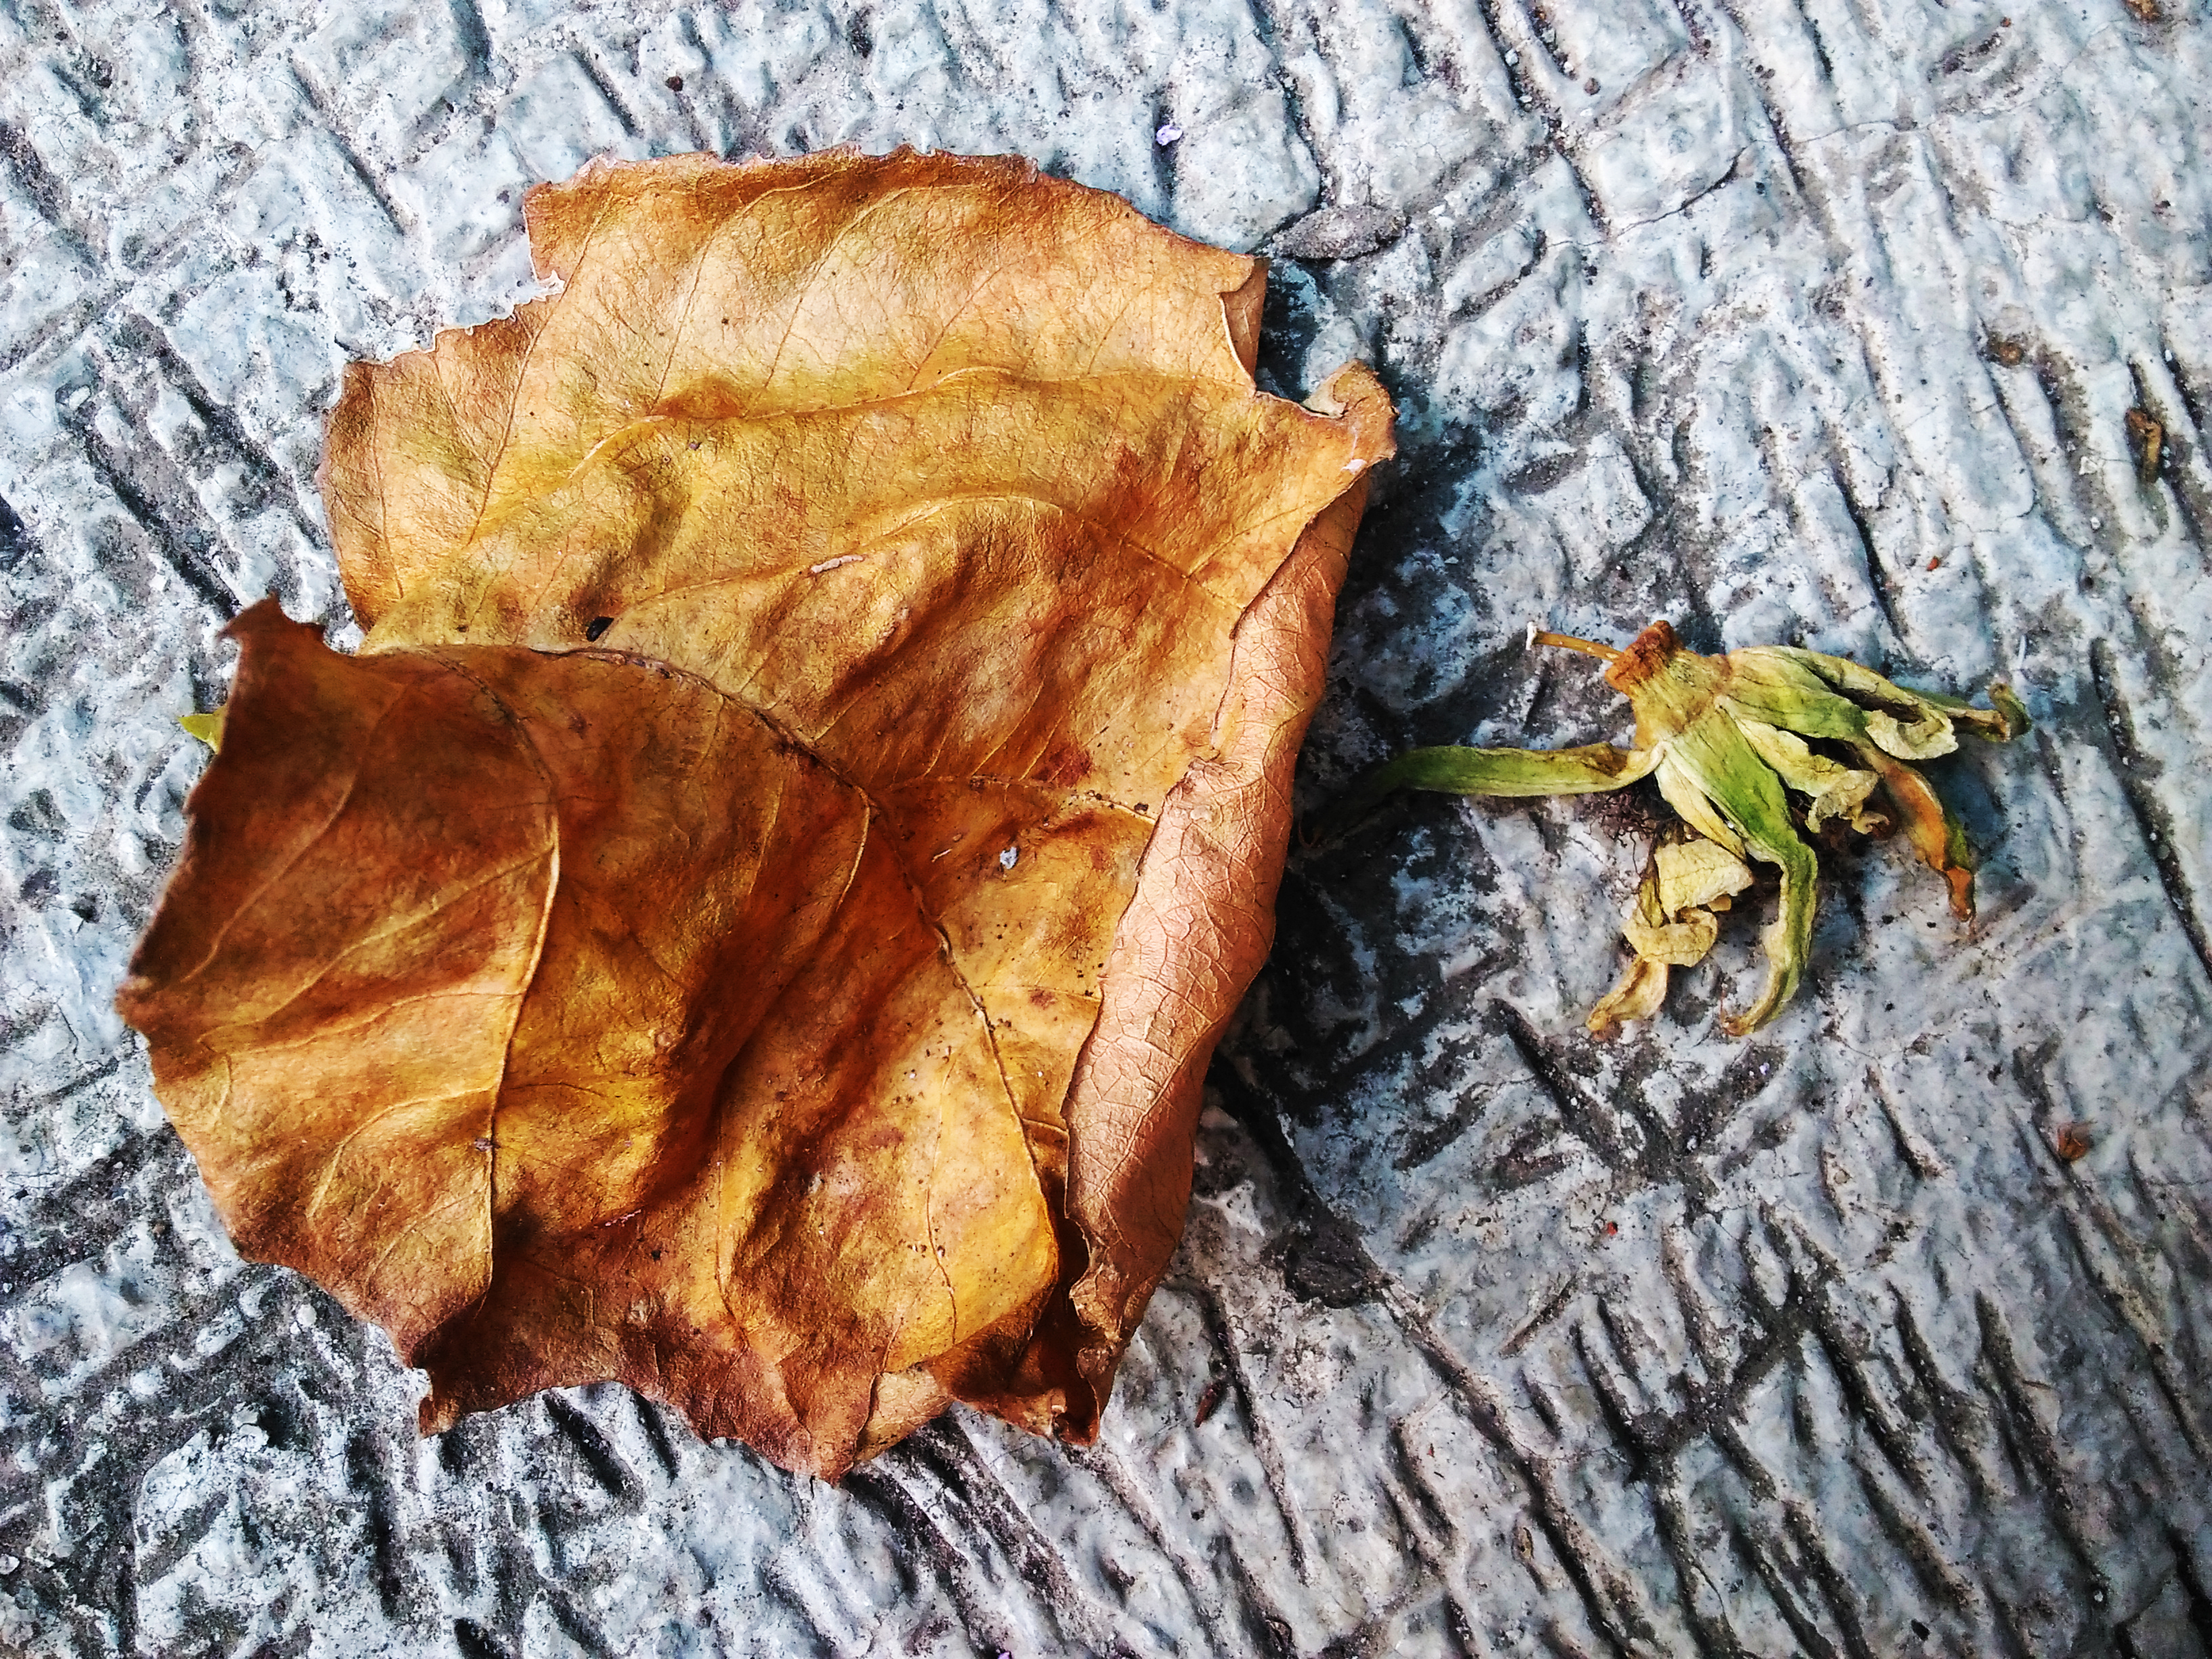 Dead leaf and flower photo